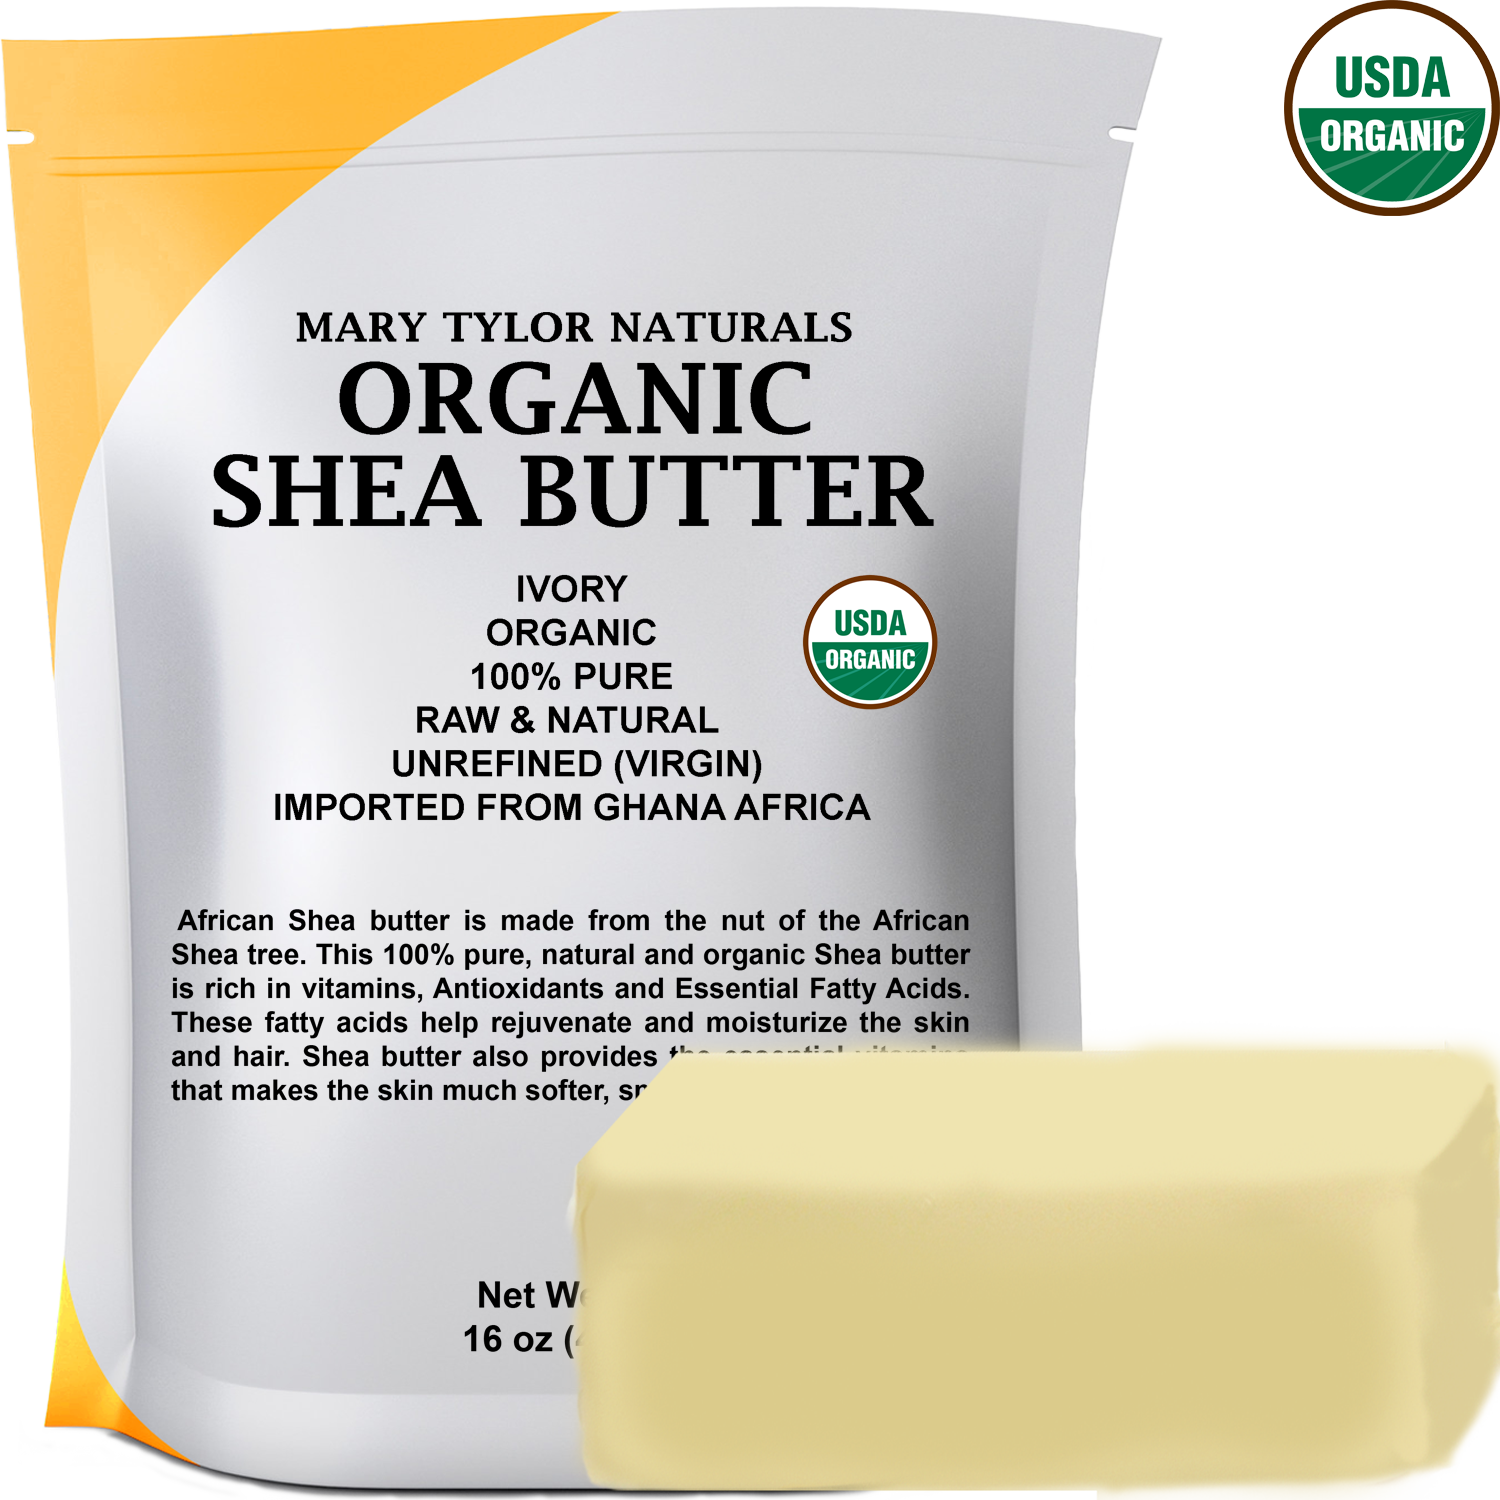 Organic Shea Butter 1 lb (16 Oz) Raw Unrefined Ivory Grade A. Amazing Skin Nourishment, Great For DIY Body Butters Lip Balms Lotions Acne Eczema & Stretch Marks By Mary Tyler Naturals - image 1 of 5